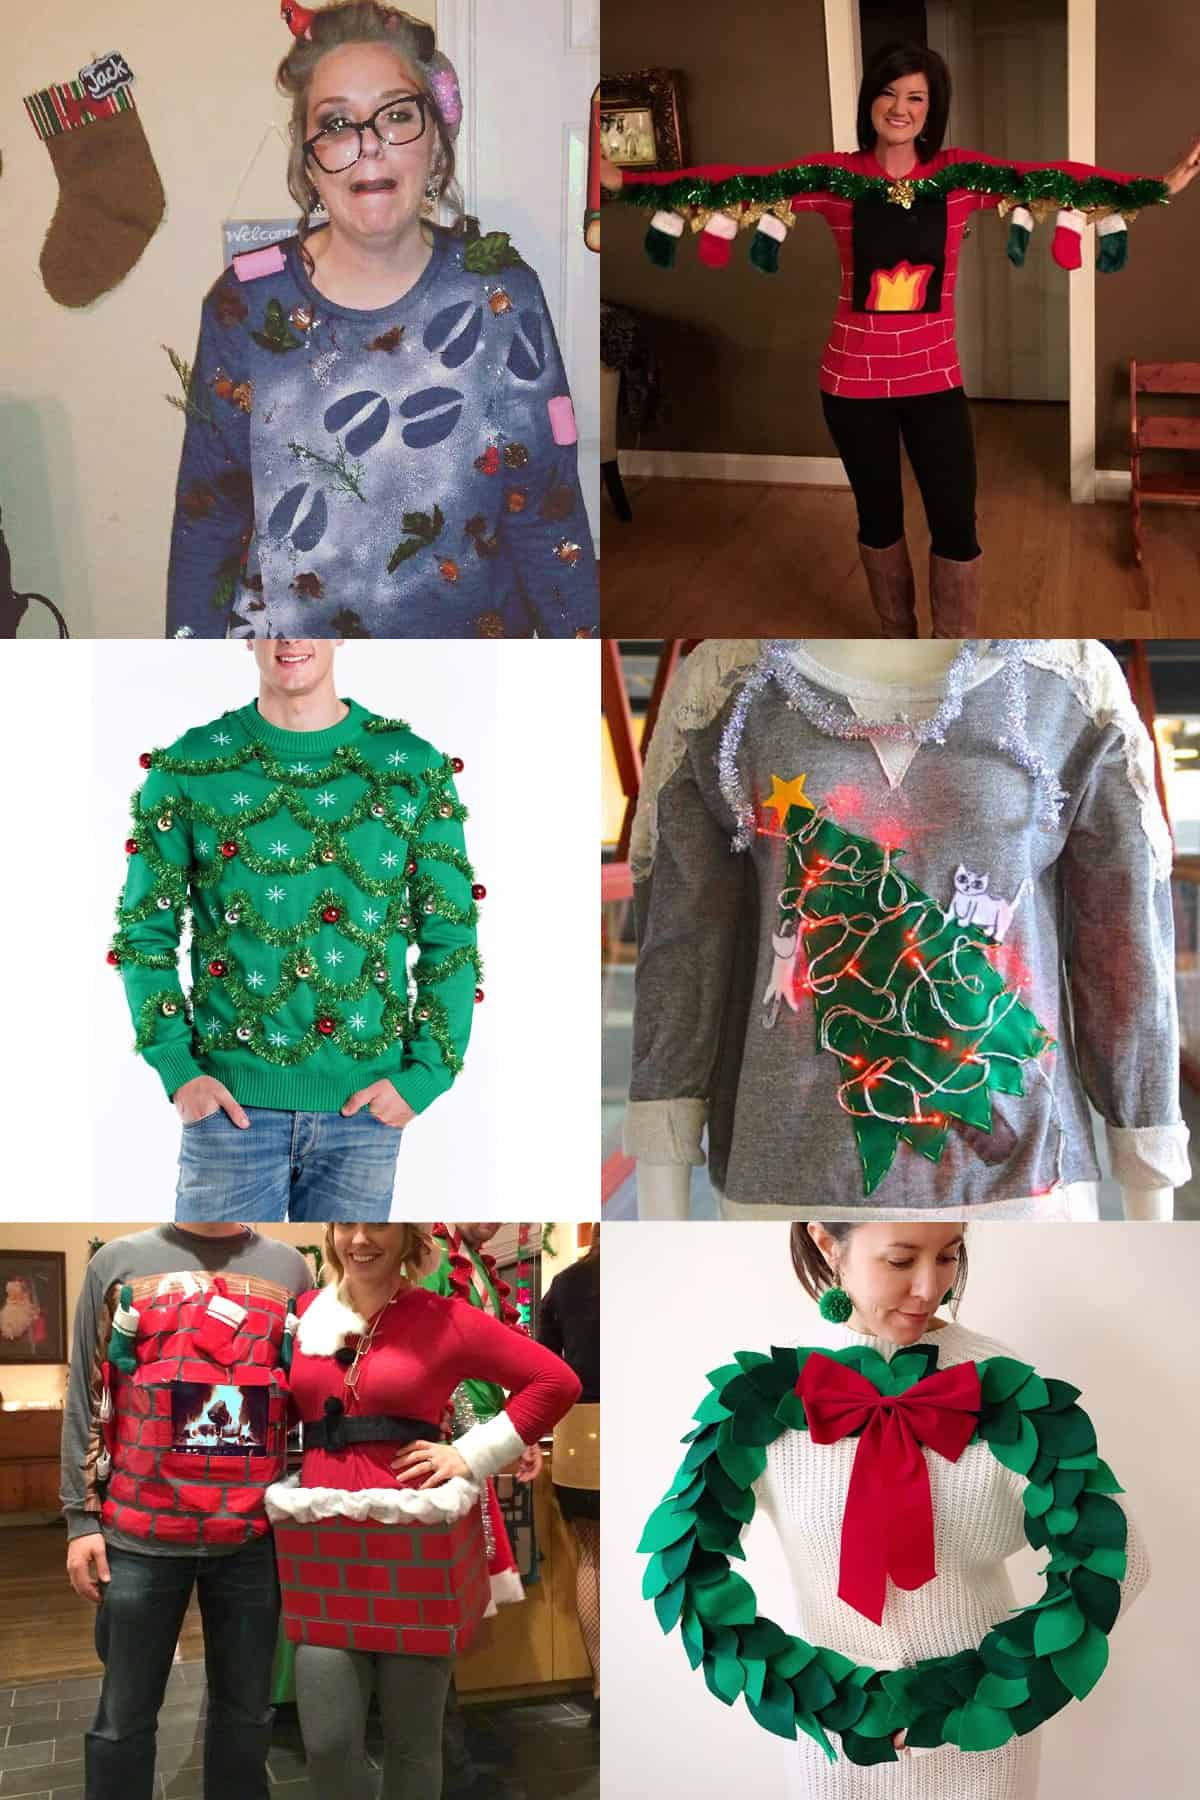 Collage of diy ugly sweater ideas you can make yourself featuring tinsel, lighted sweaters, jingle bells and Christmas embellishments.